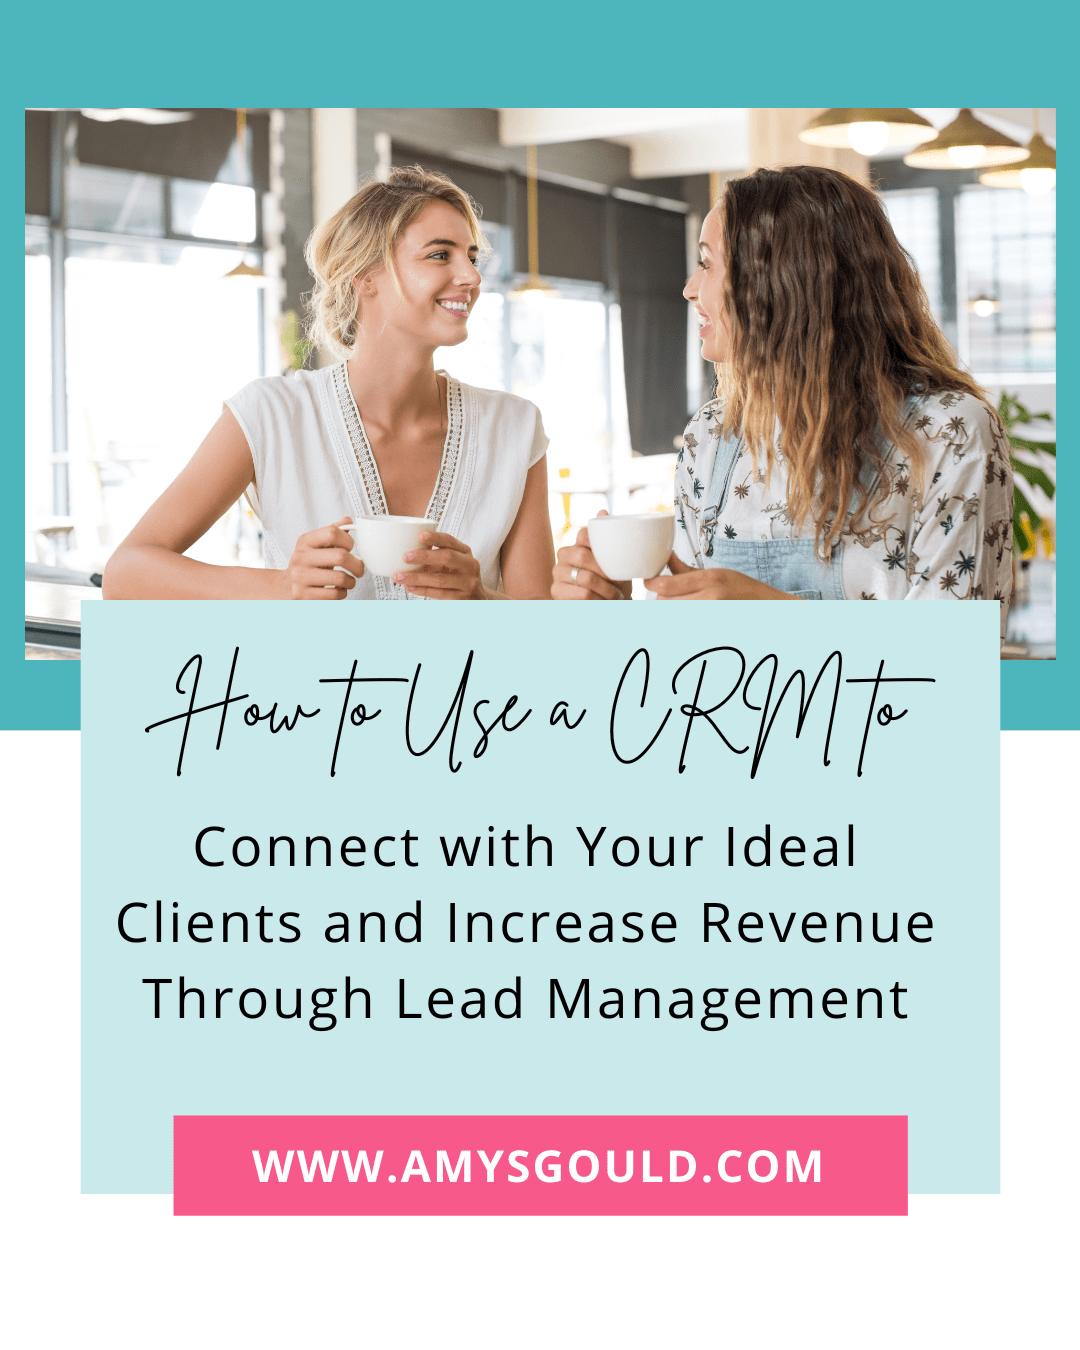 How to Use a CRM to Connect with Your Ideal Clients and Increase Revenue Through Lead Management